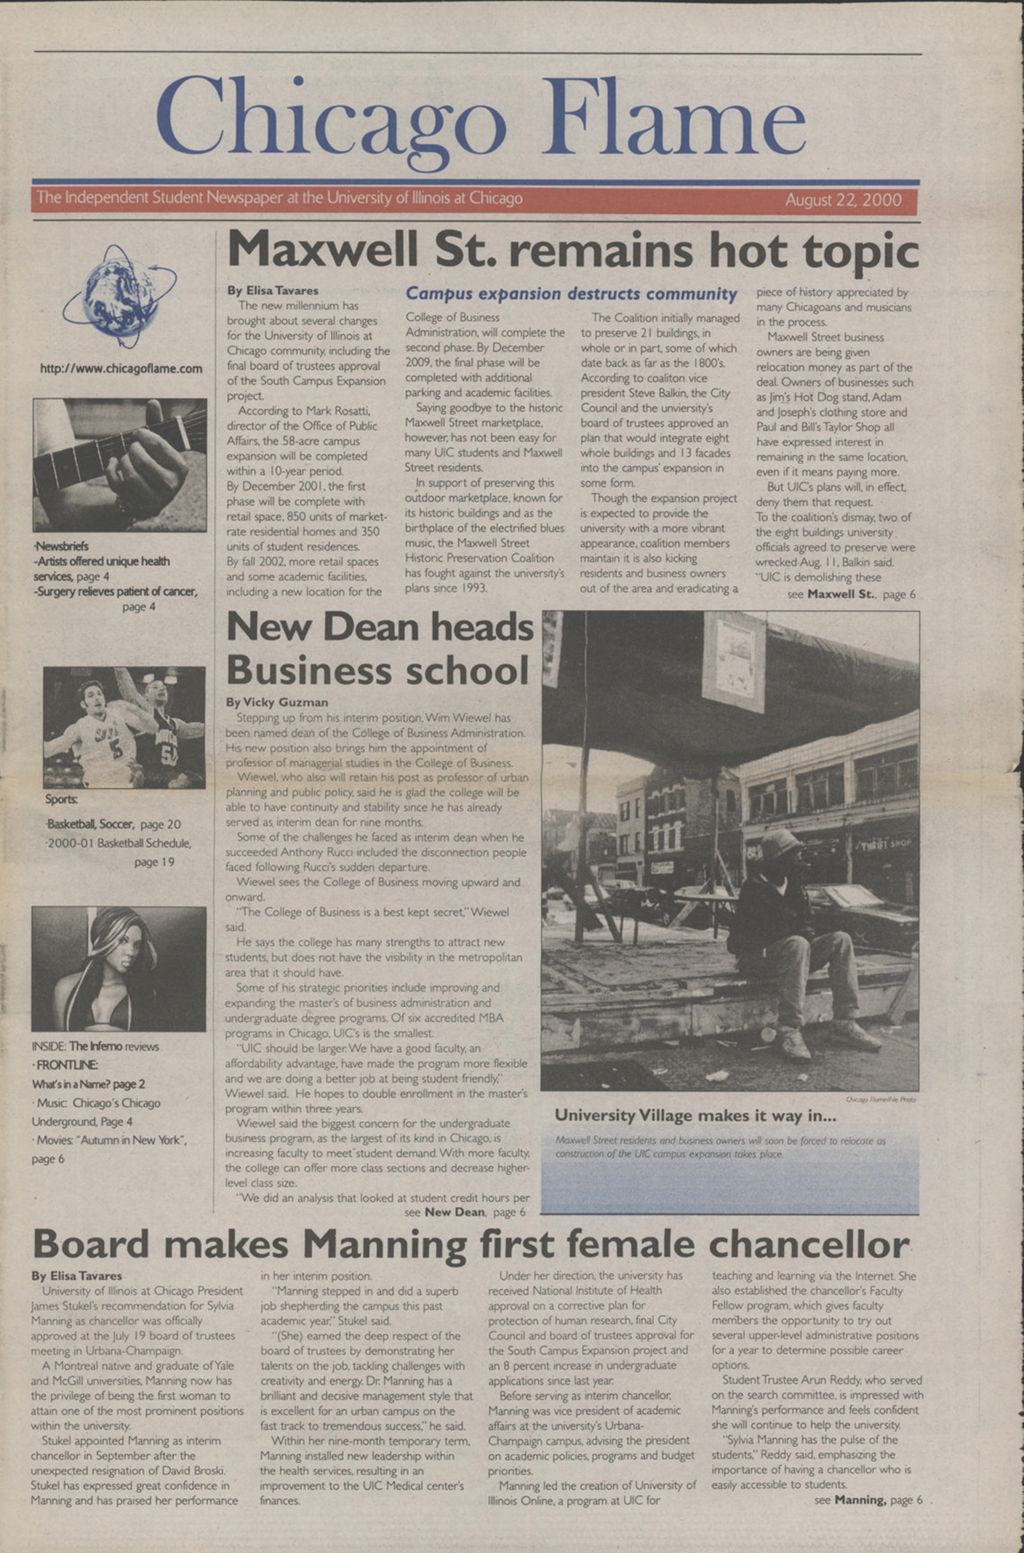 Miniature of Chicago Flame (August 22, 2000)